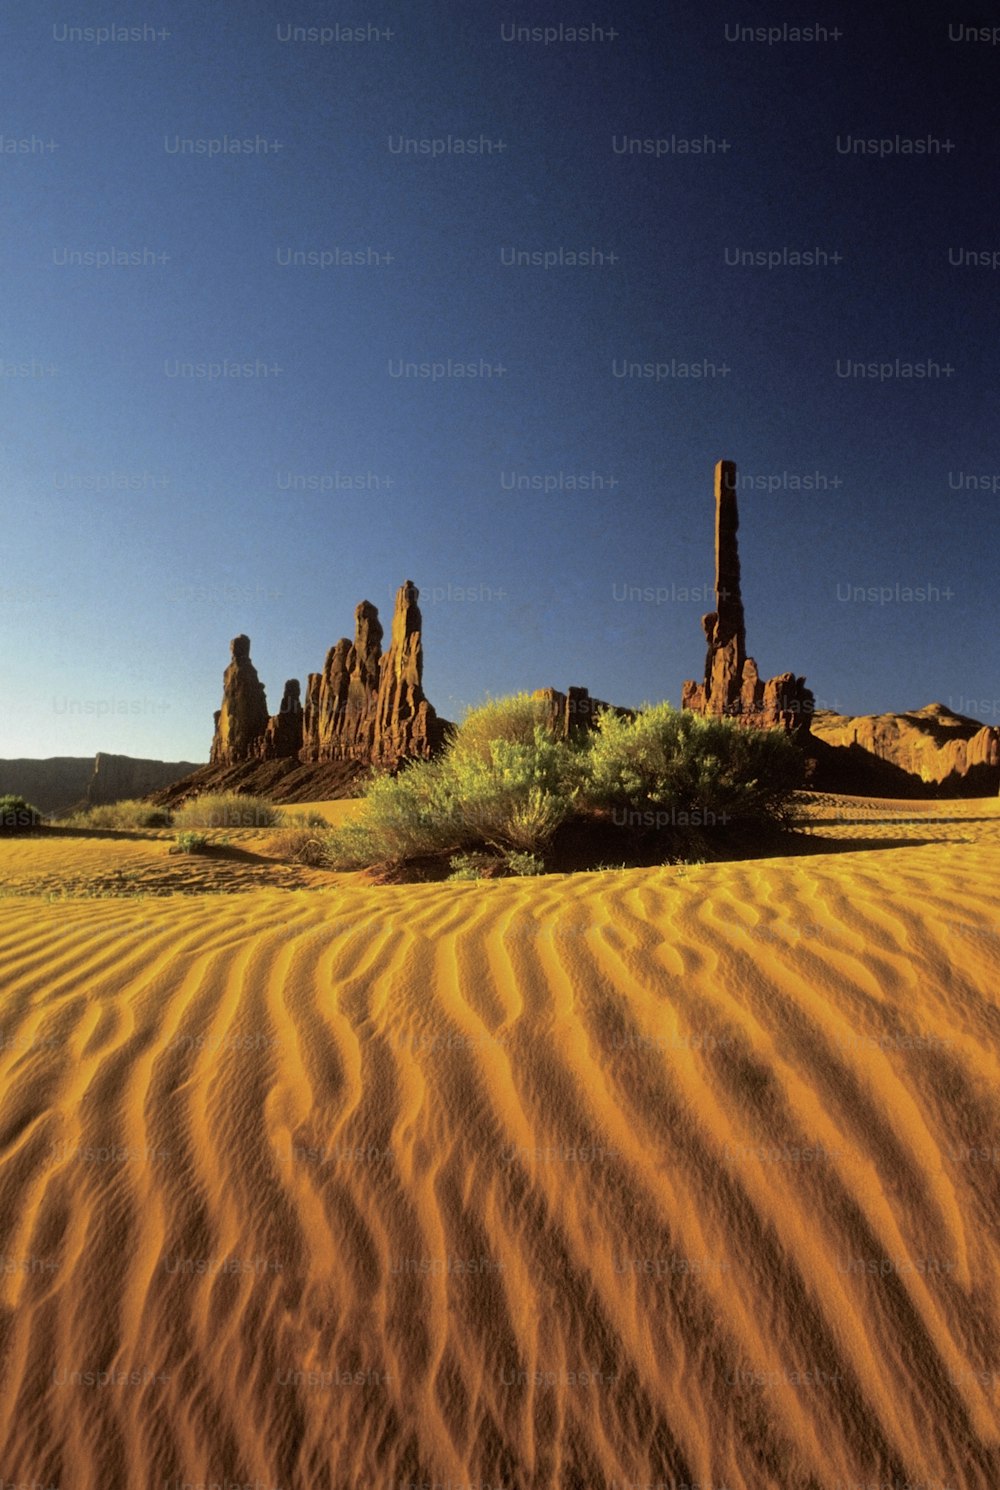 a desert landscape with rocks and grass in the foreground